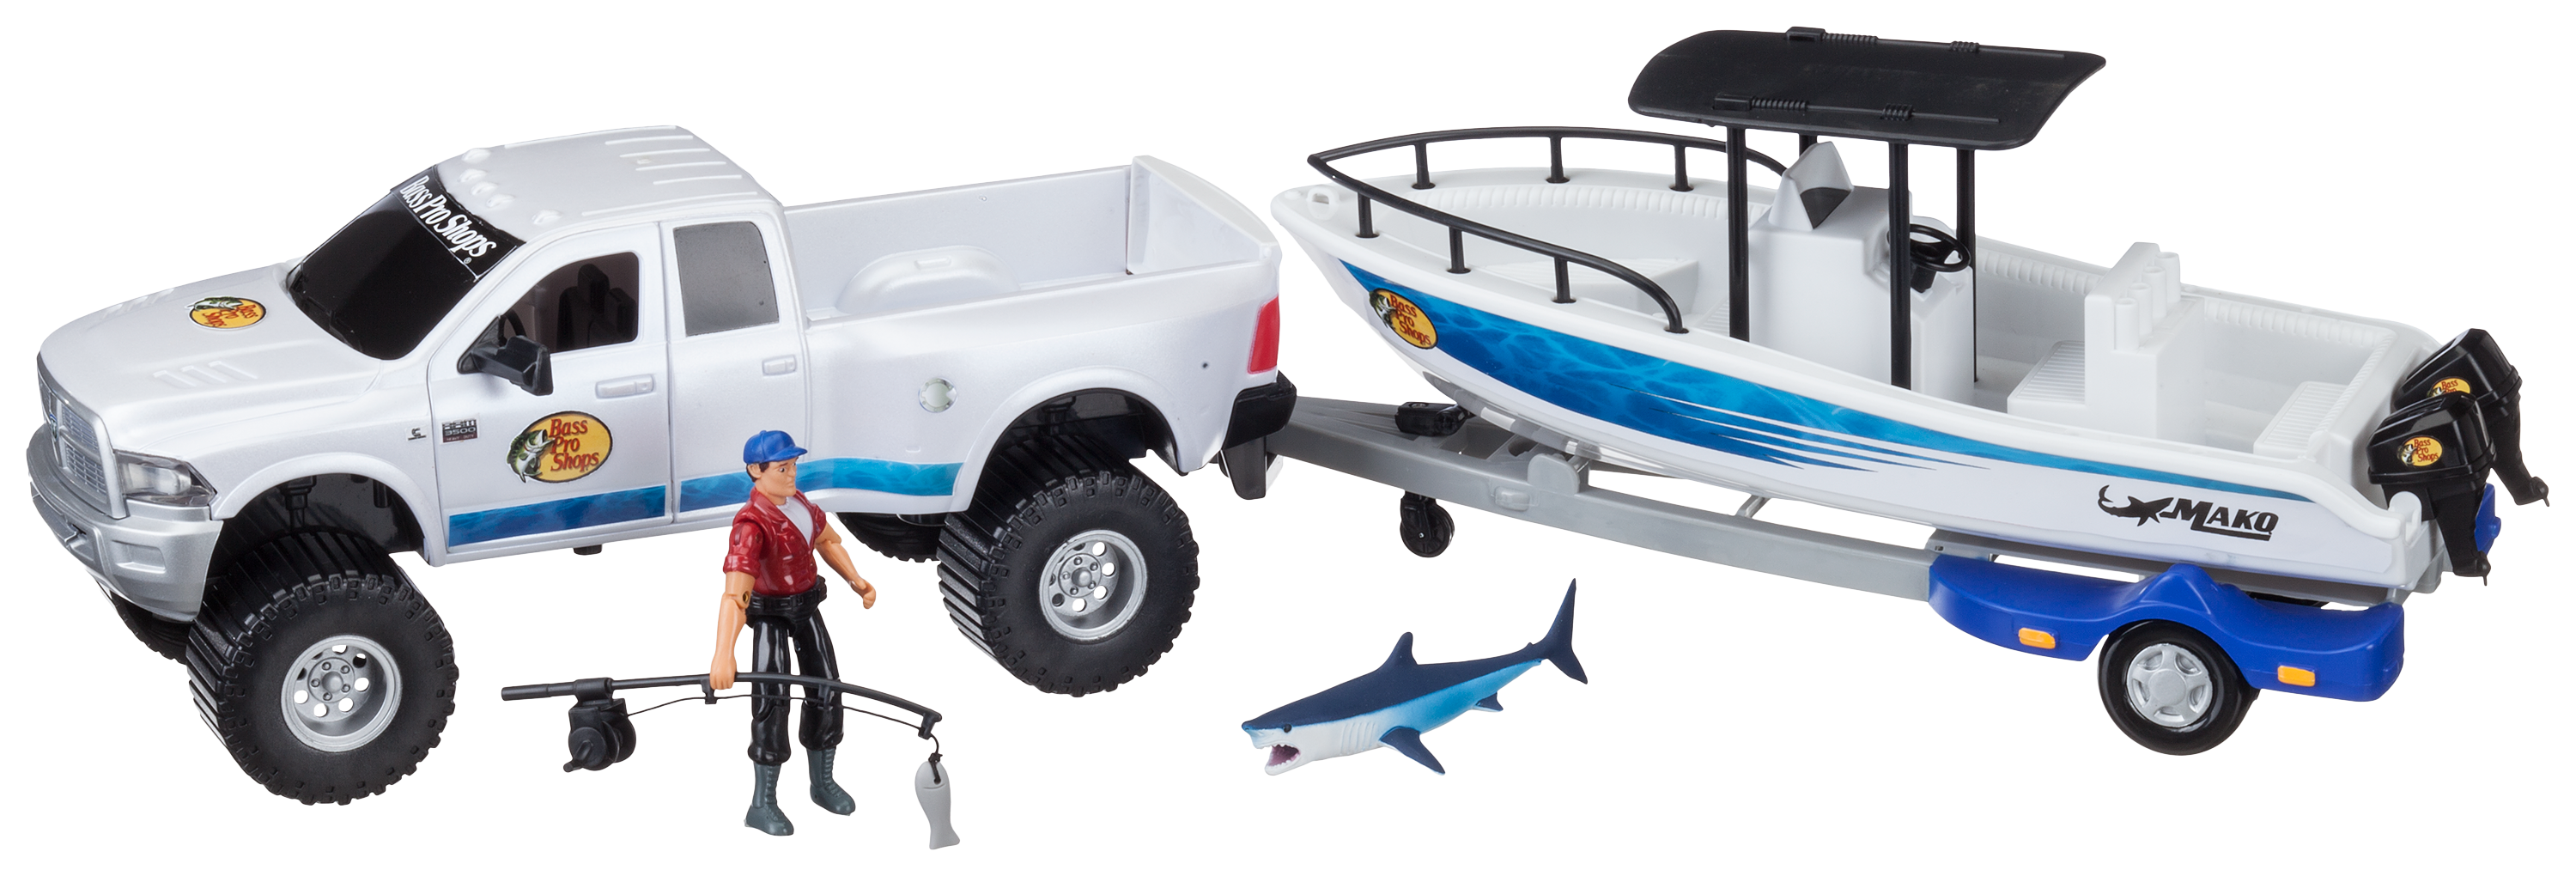 Bass Pro Shops Saltwater Fishing Adventure Truck and Boat Play Set